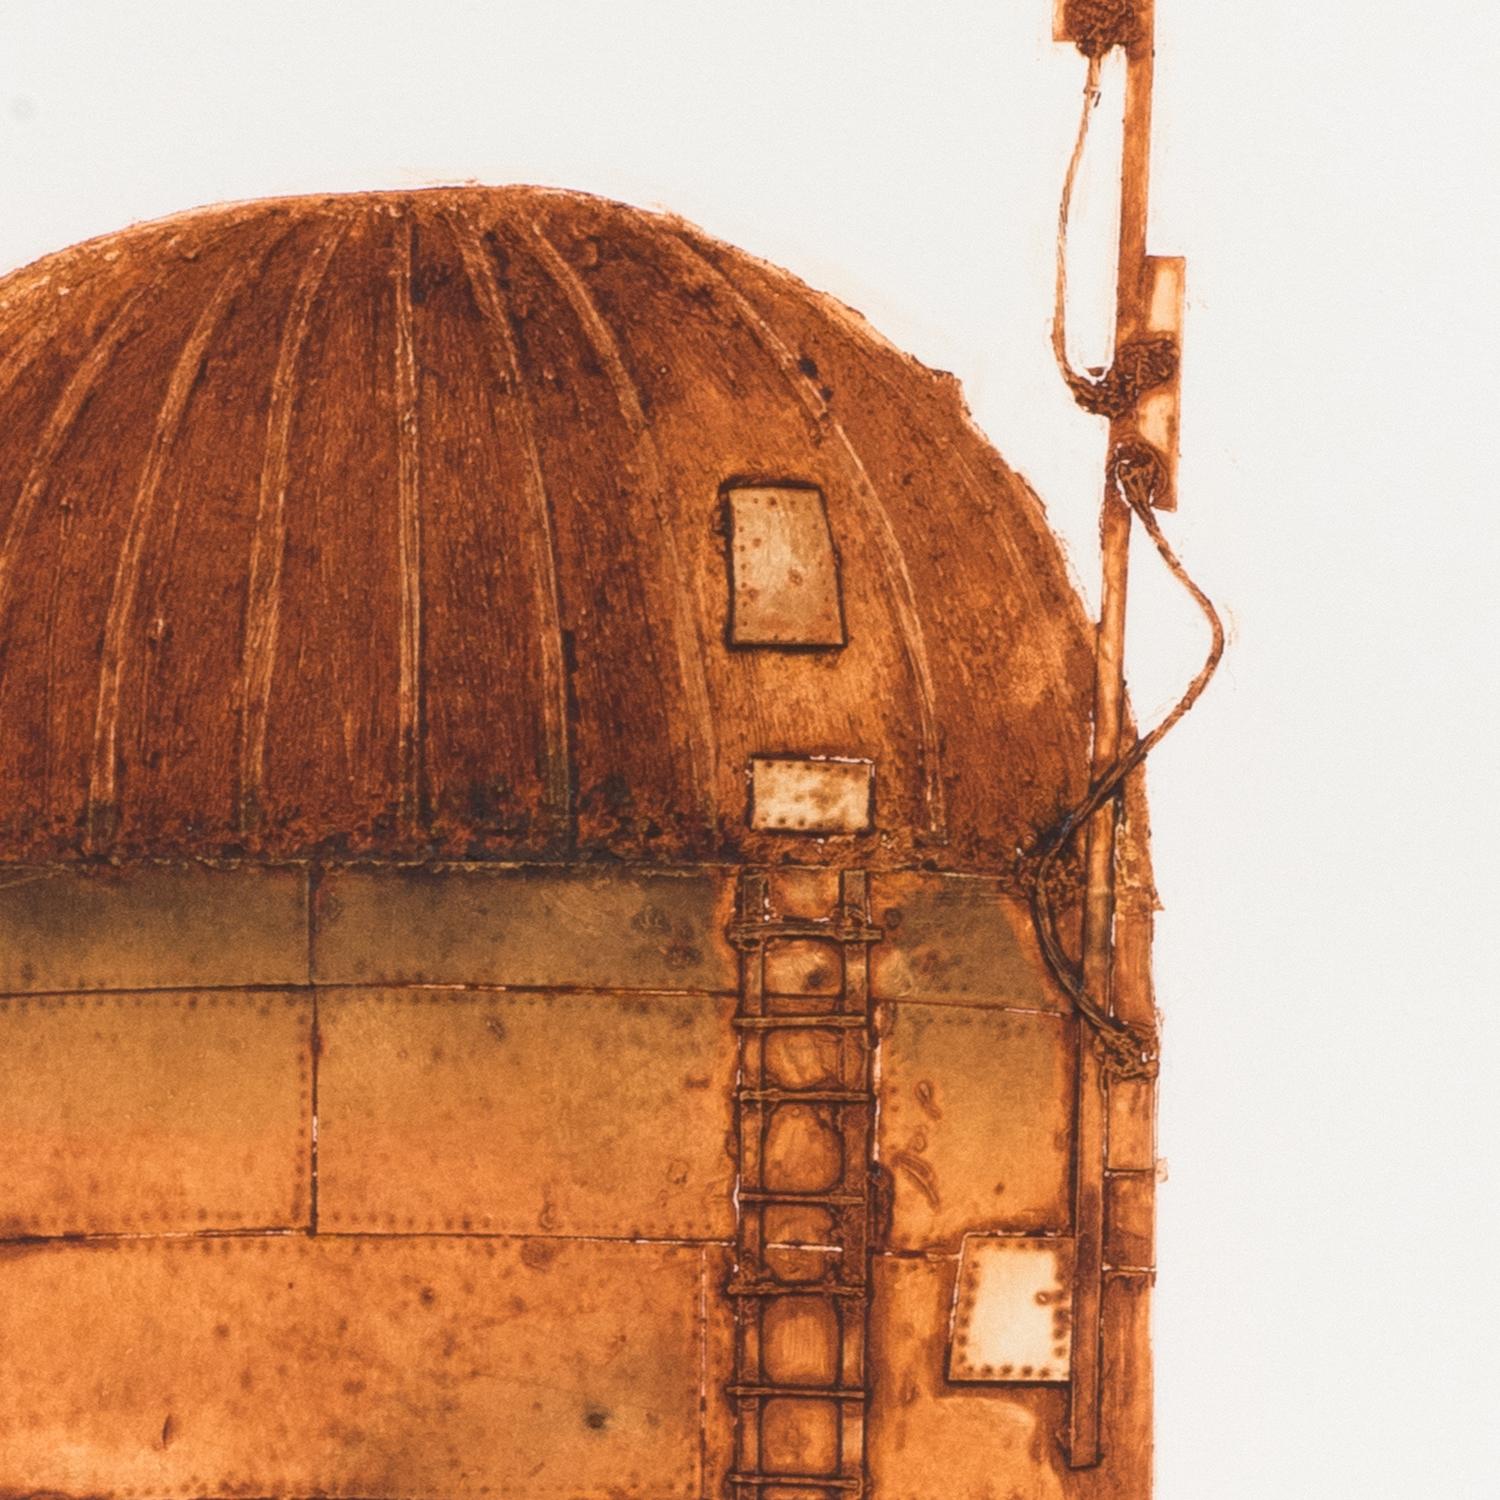 FeO(OH), Silo, 2017 collagraph print, variable edition, framed and unframed

Rust is both an indicator of decay and the passage of time.  While rusted out objects often represent a failed glory or state of neglect, they also present an inherent